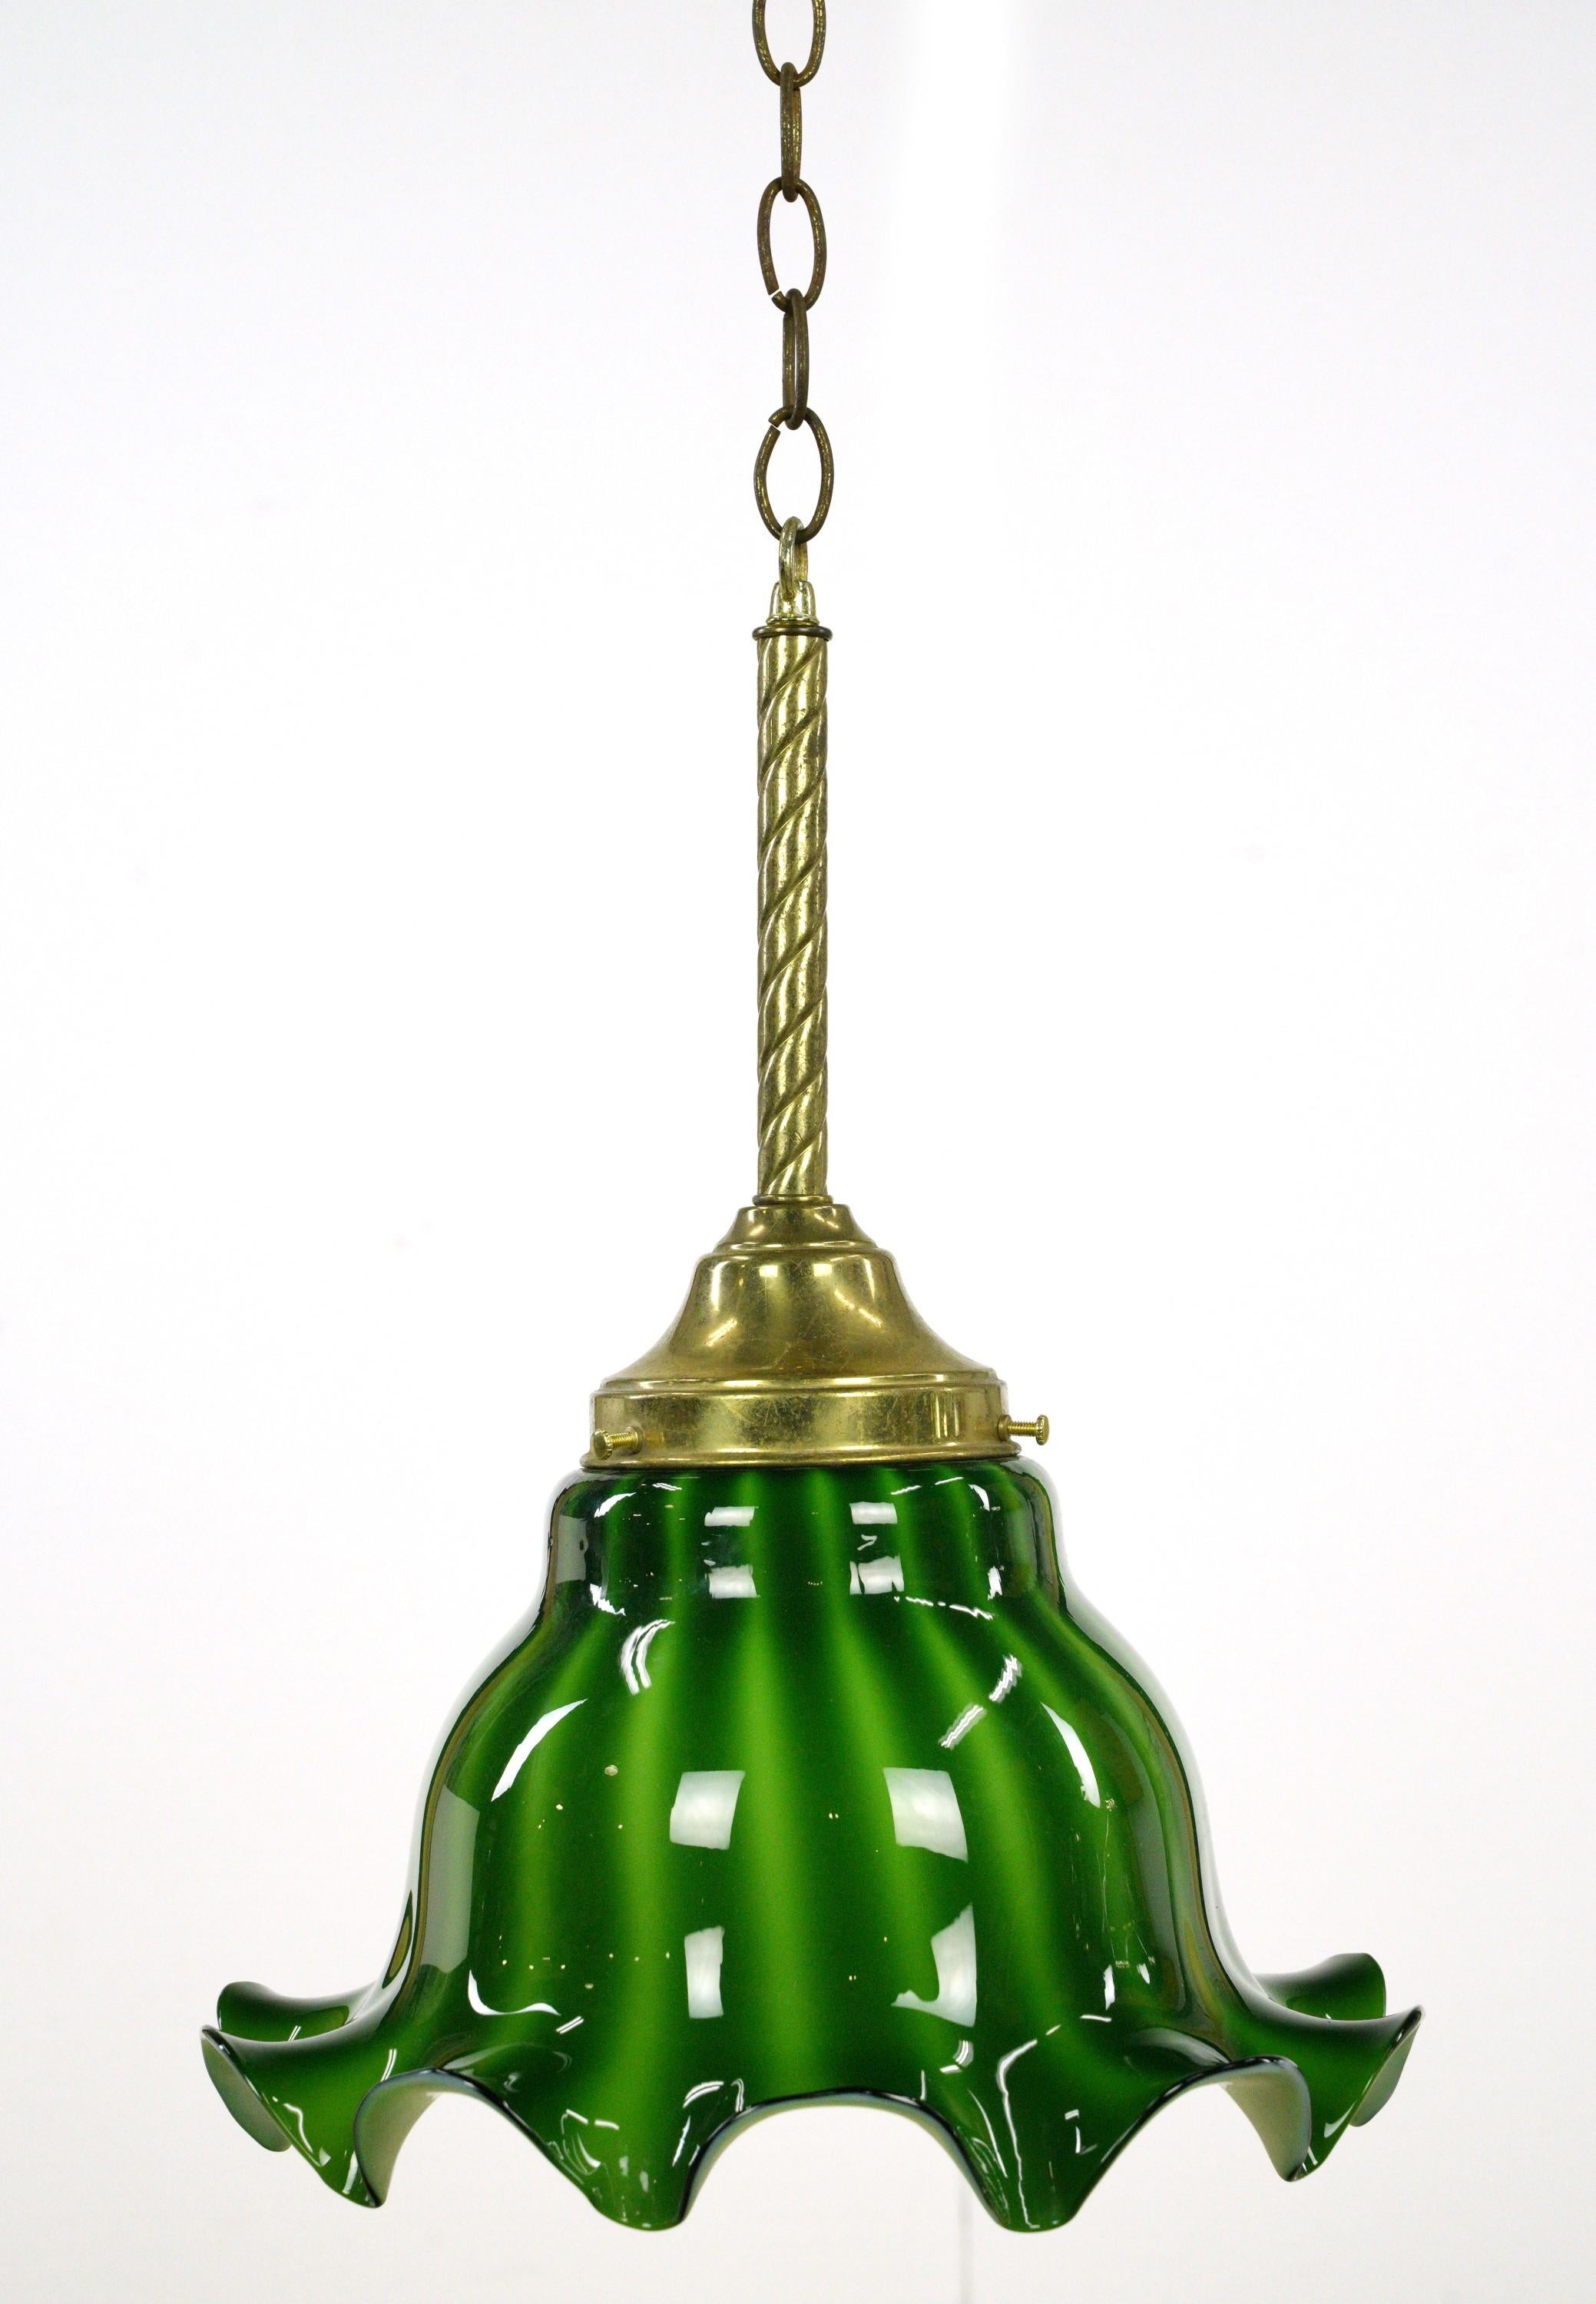 20th Century pendant light with a green ruffled glass shade and a brass chain fitter. This requires one standard medium base bulb. The price includes restoration of cleaning and rewiring. Good condition with appropriate wear from age. Cleaned and